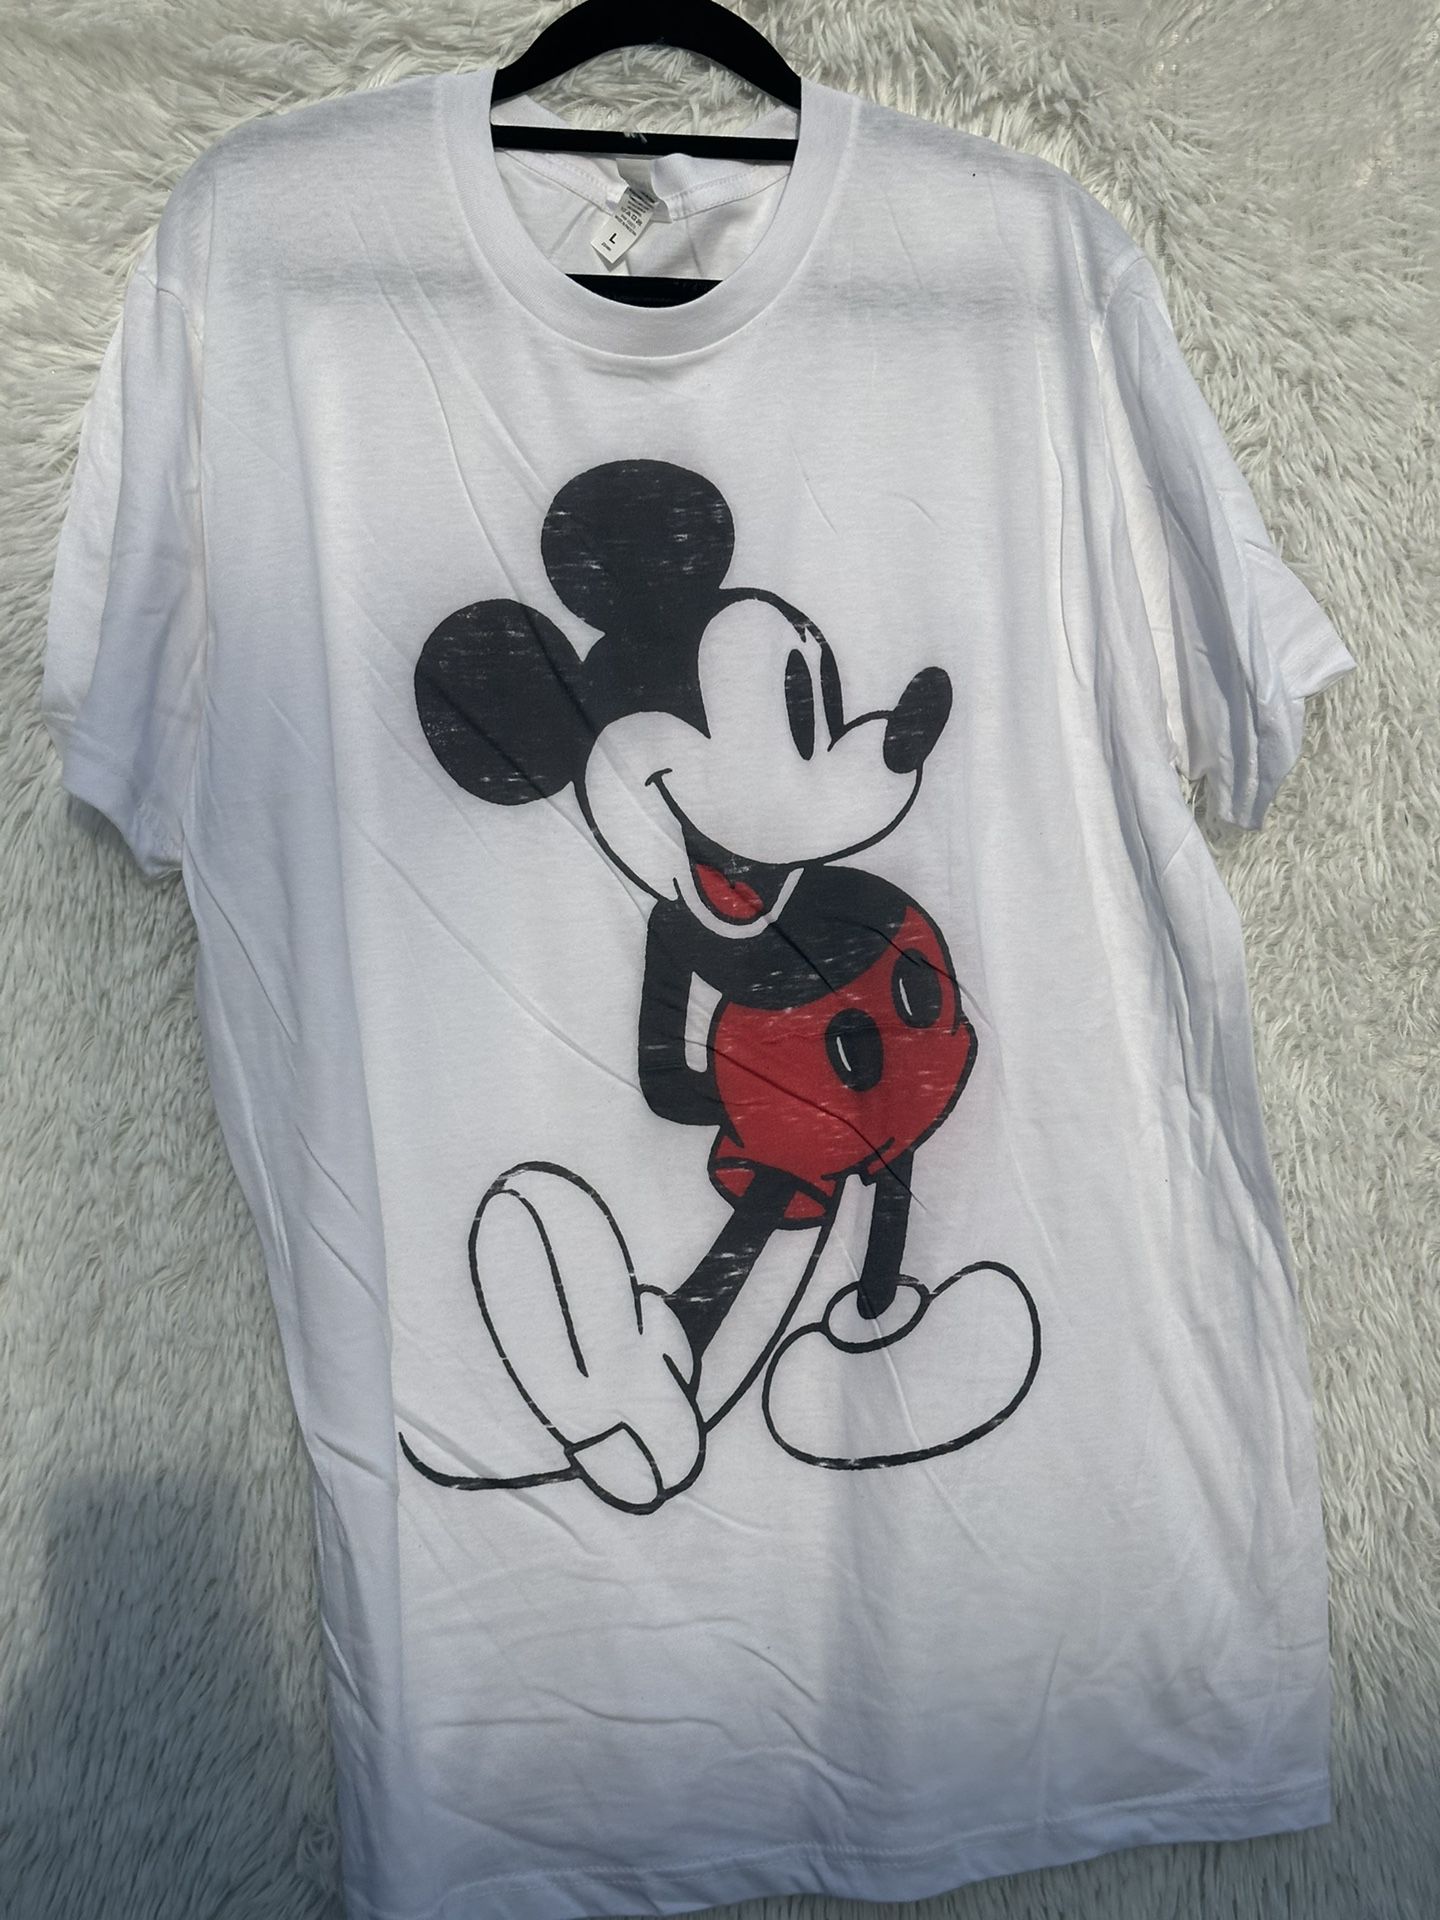 New Graphic T-Shirt  T-shirt Large size Crew neck  Mickey Mouse